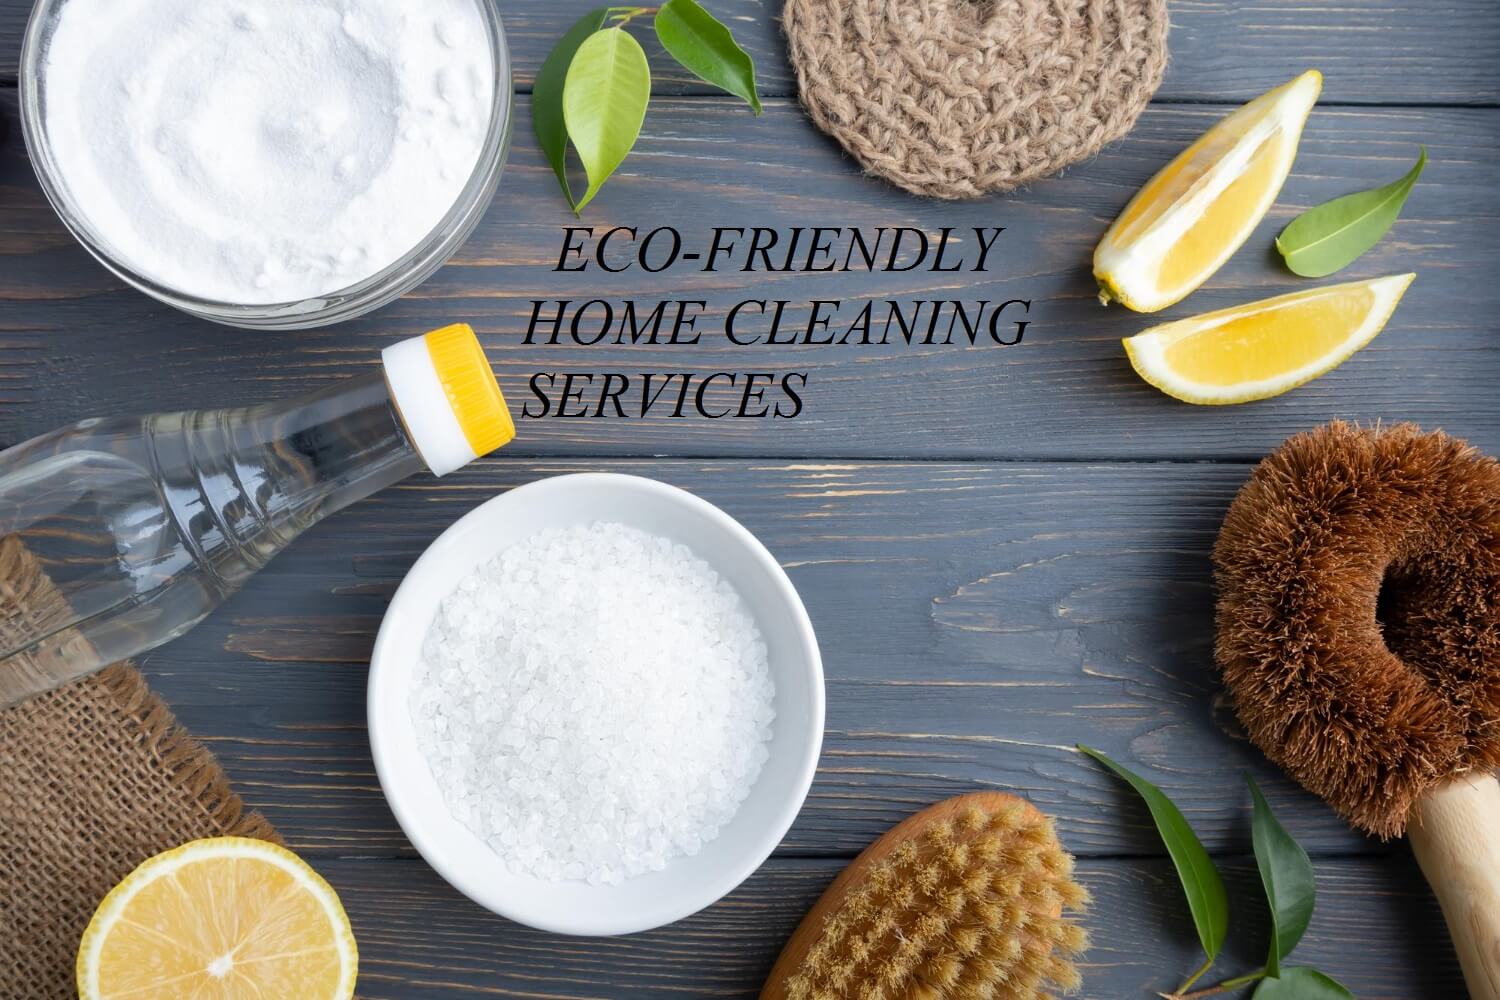 Six Reasons to Hire an Eco-Friendly Home Cleaning Service